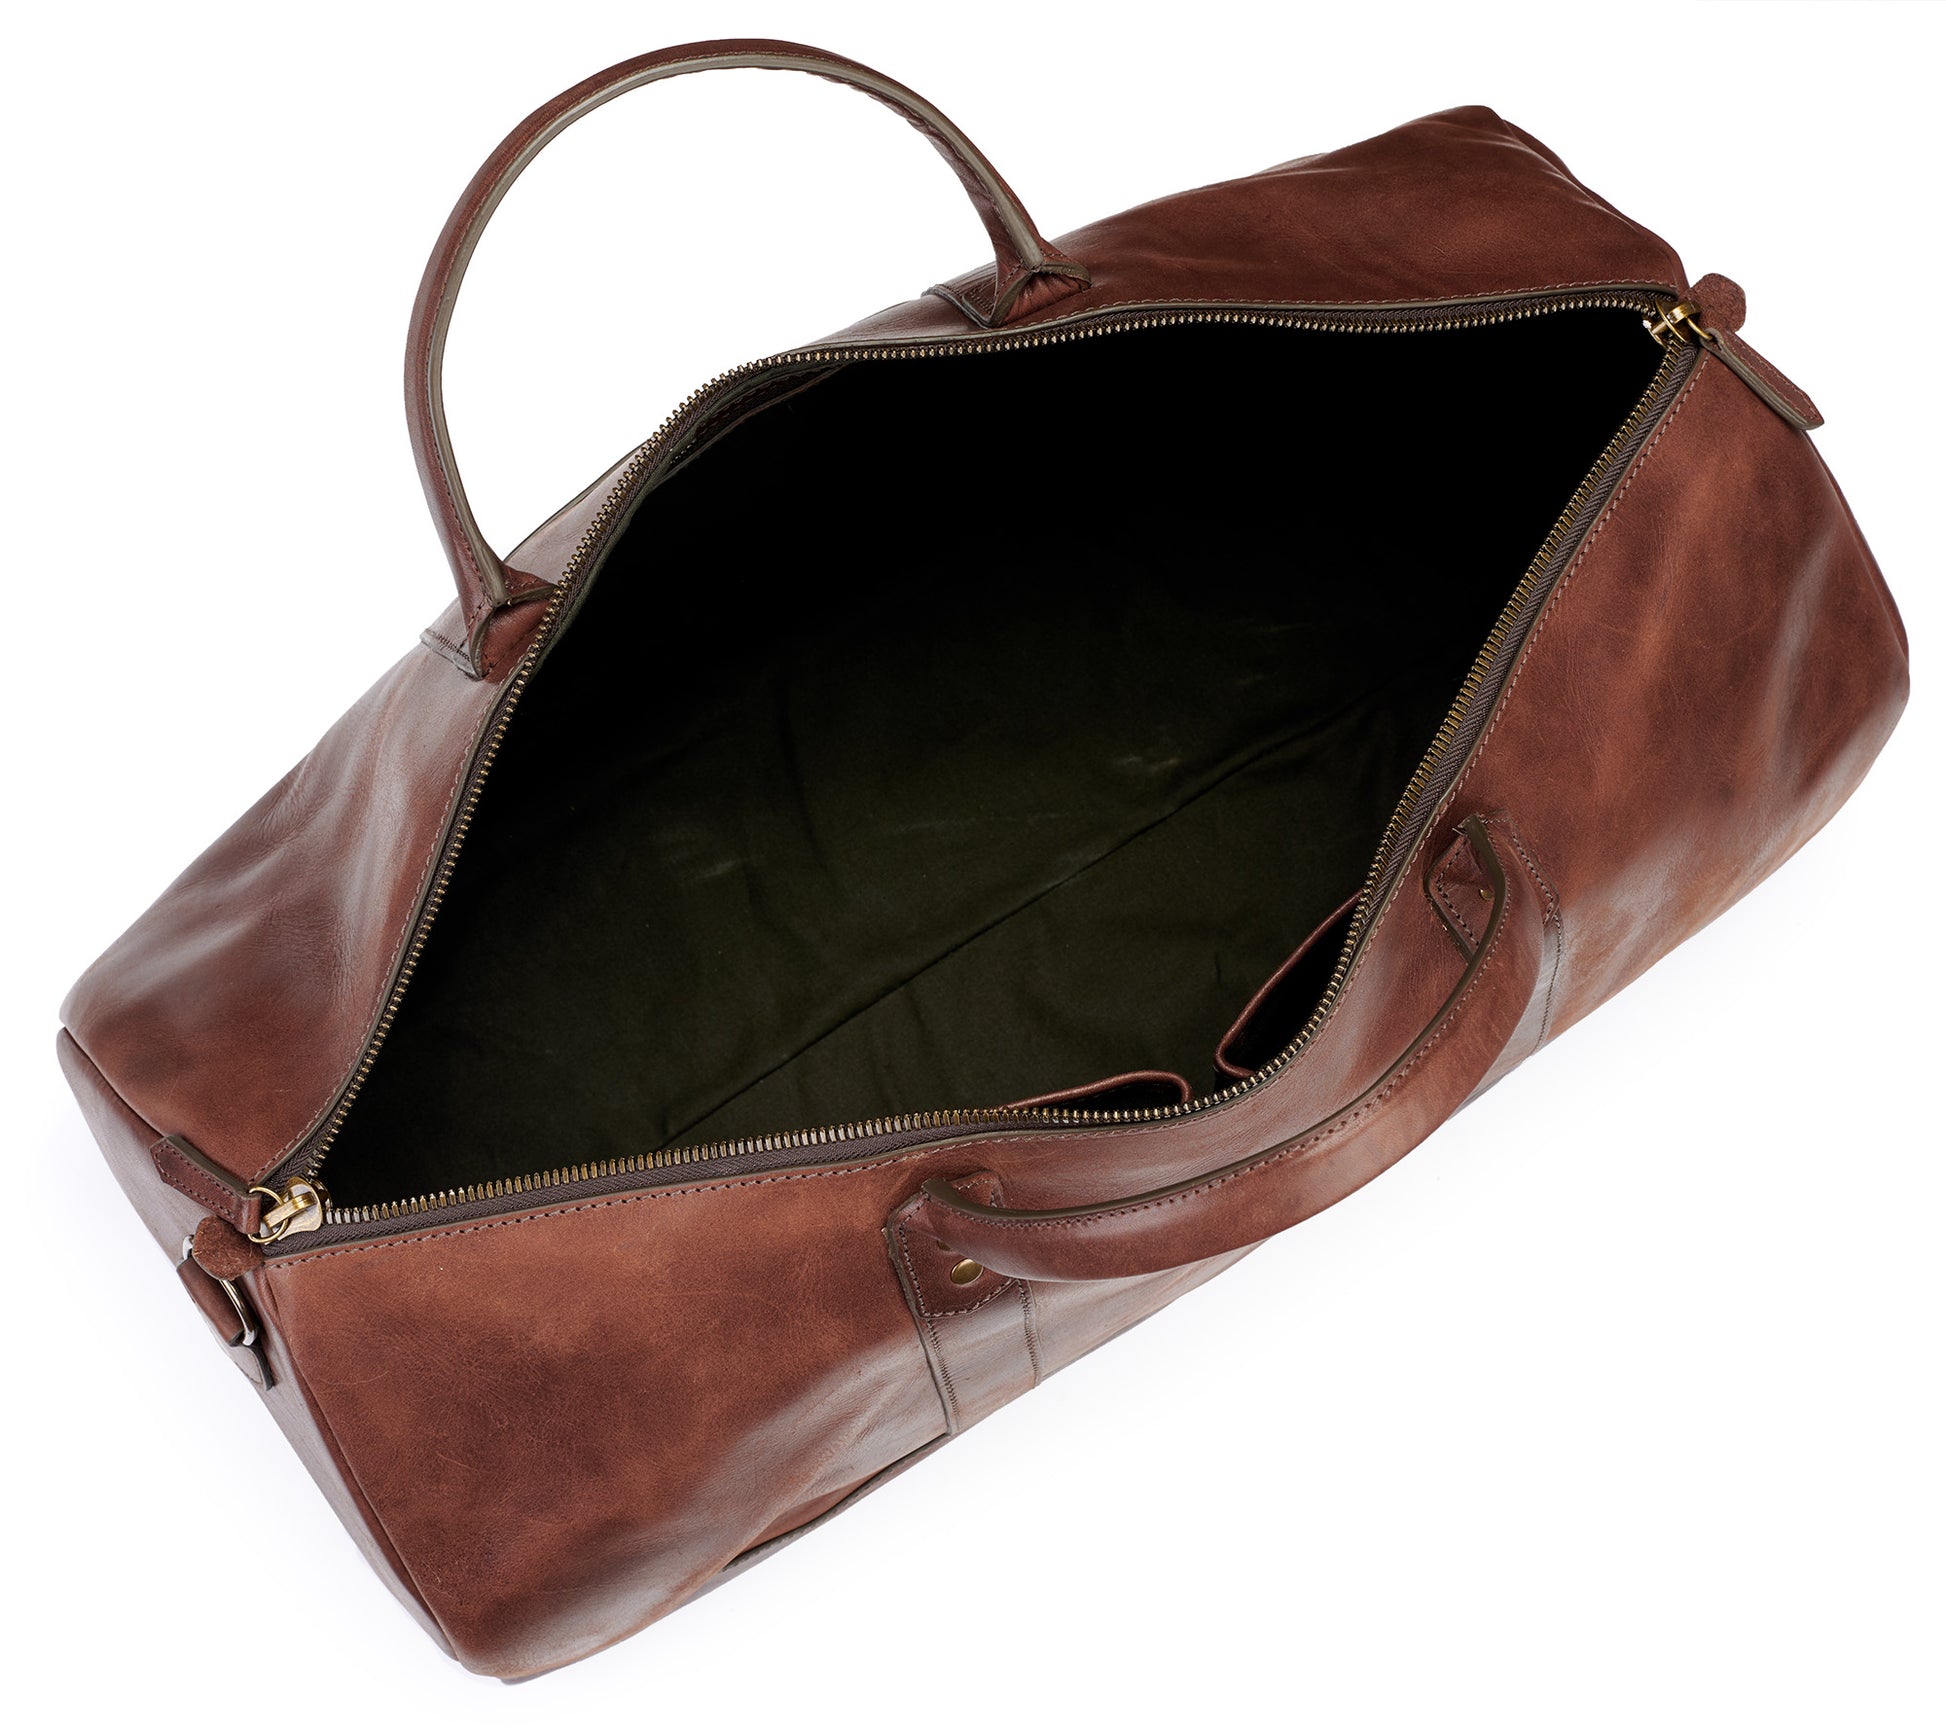 inside open of Big Sur Duffle bag in vintage brown color with water repellent army canvas lining in Pine Green and vintage brown leather